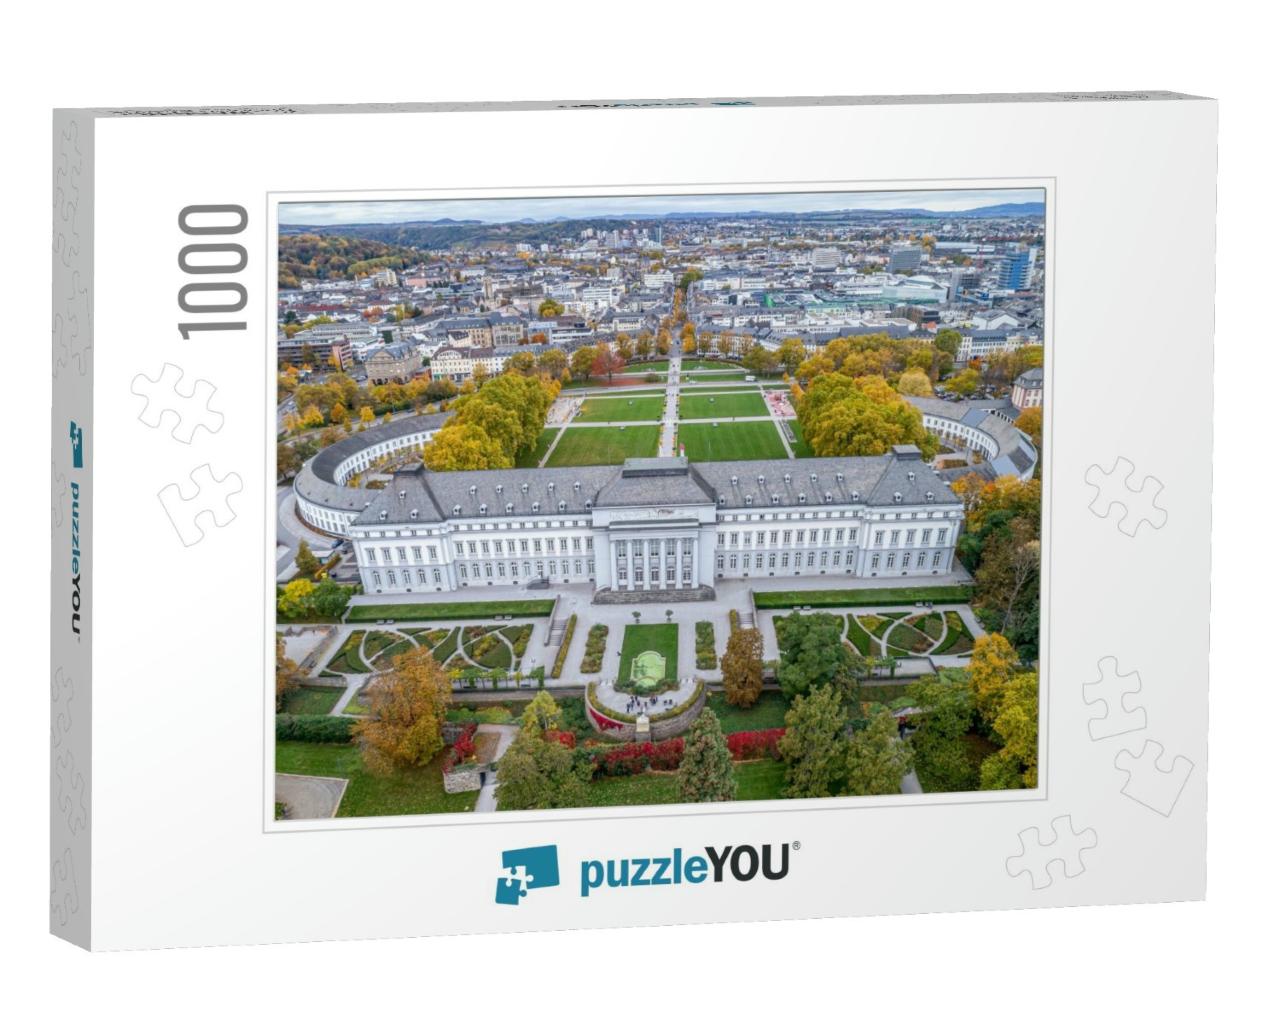 Koblenz City in Rhineland Palantino - Germany - Aerial Sh... Jigsaw Puzzle with 1000 pieces